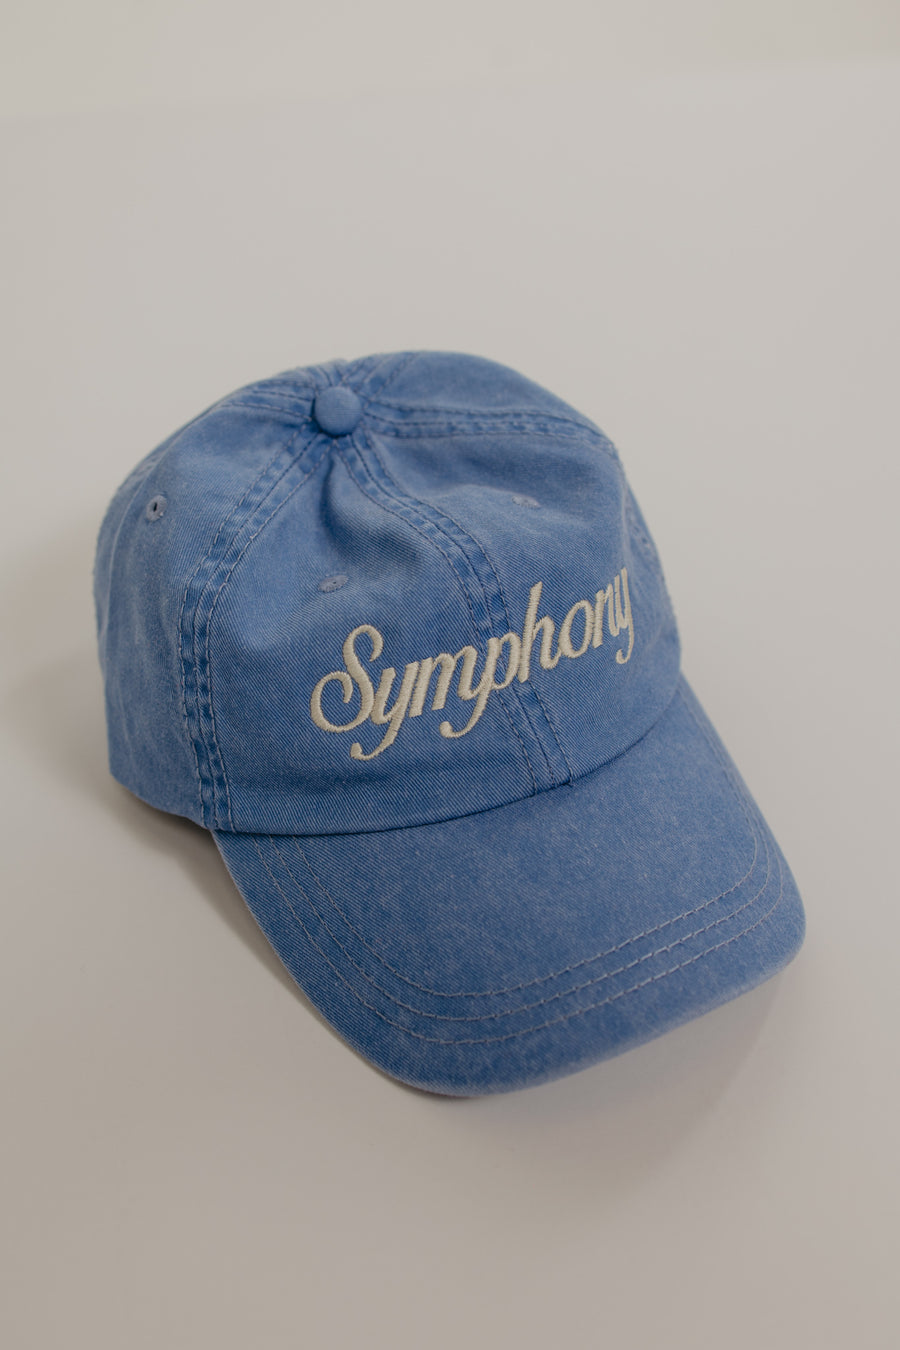 Symphony Dad Hat - Limited Edition!